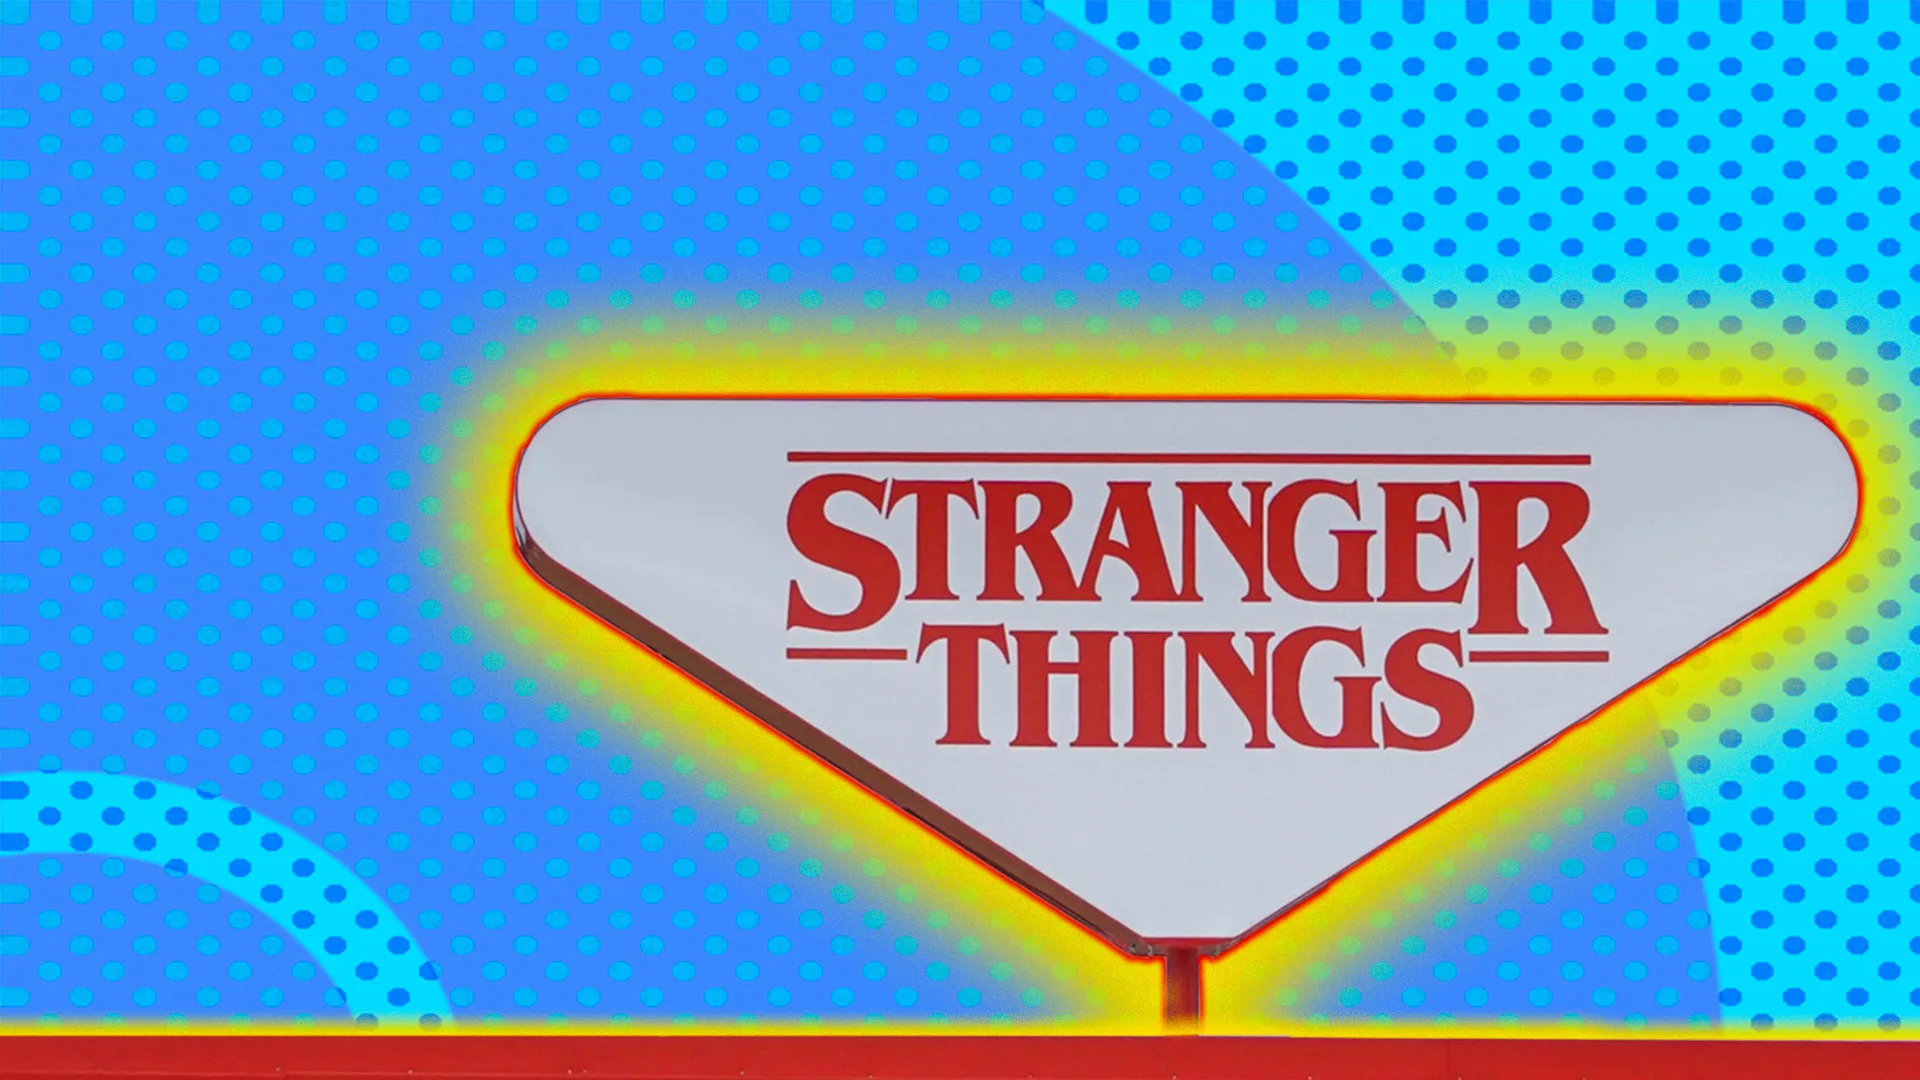 Stranger things sign on top of a building with a polkadot background and a glow around the image